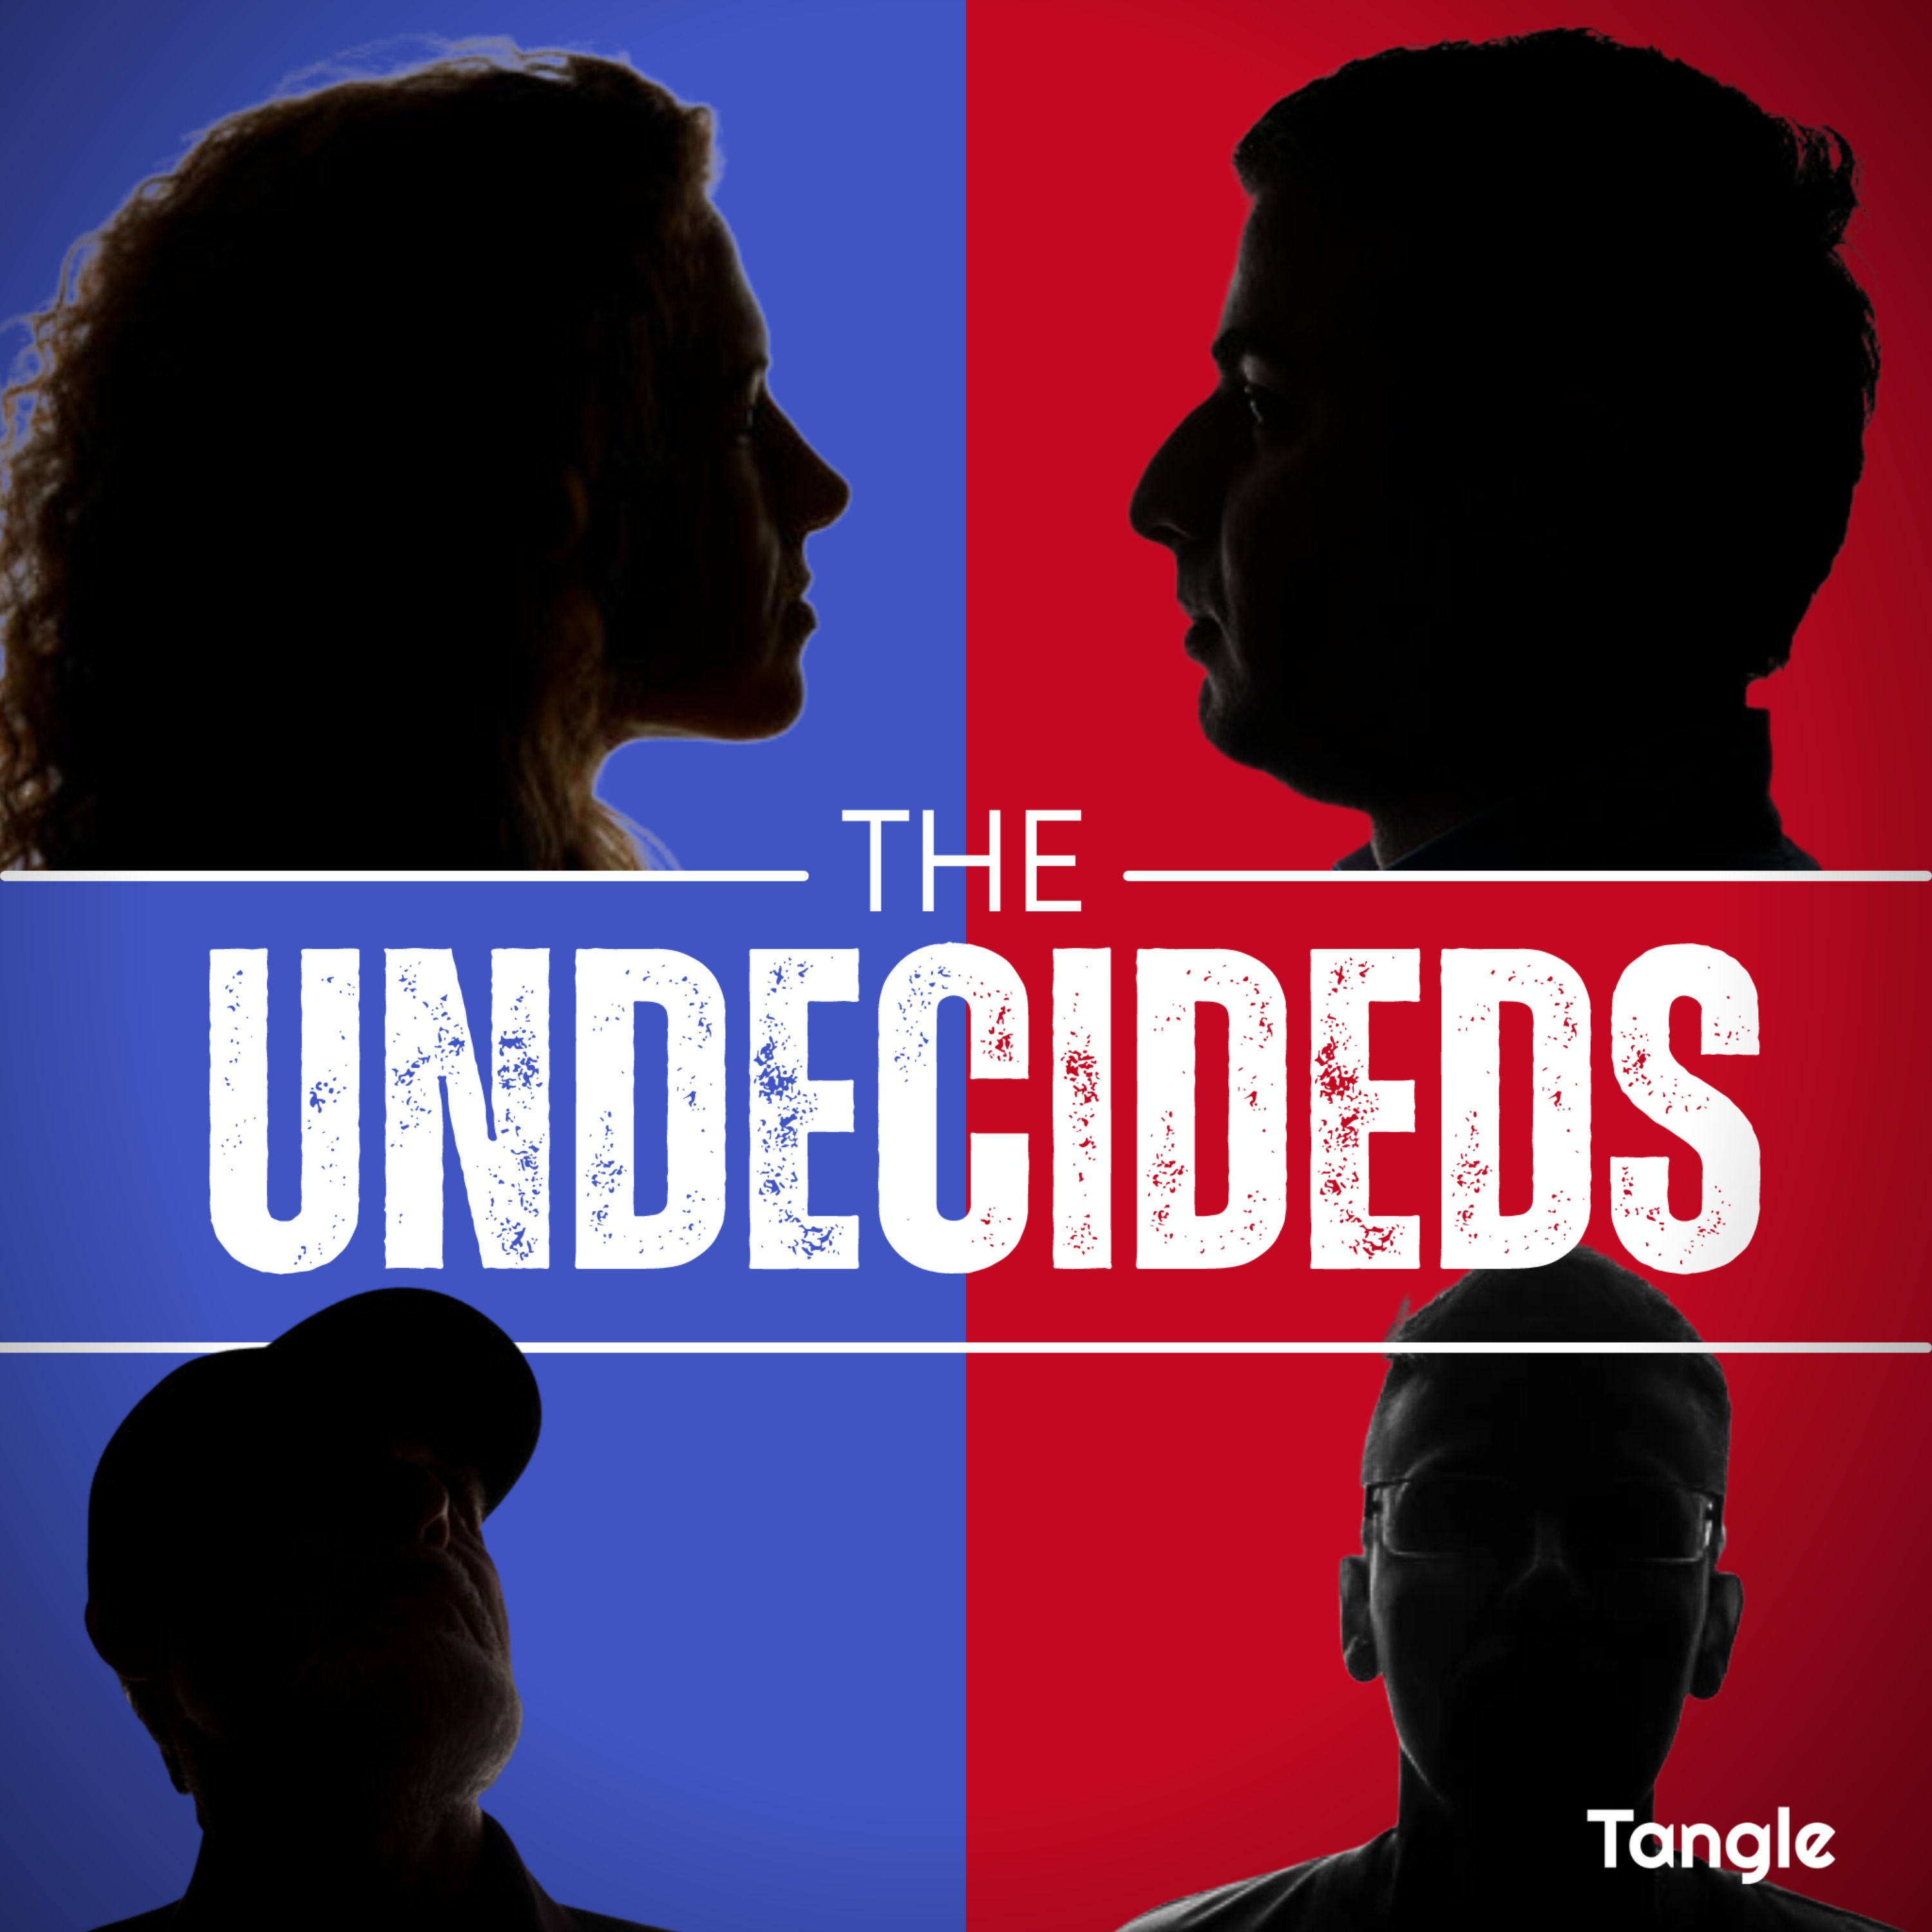 The Undecideds - Episode 5 - The First Presidential Debate